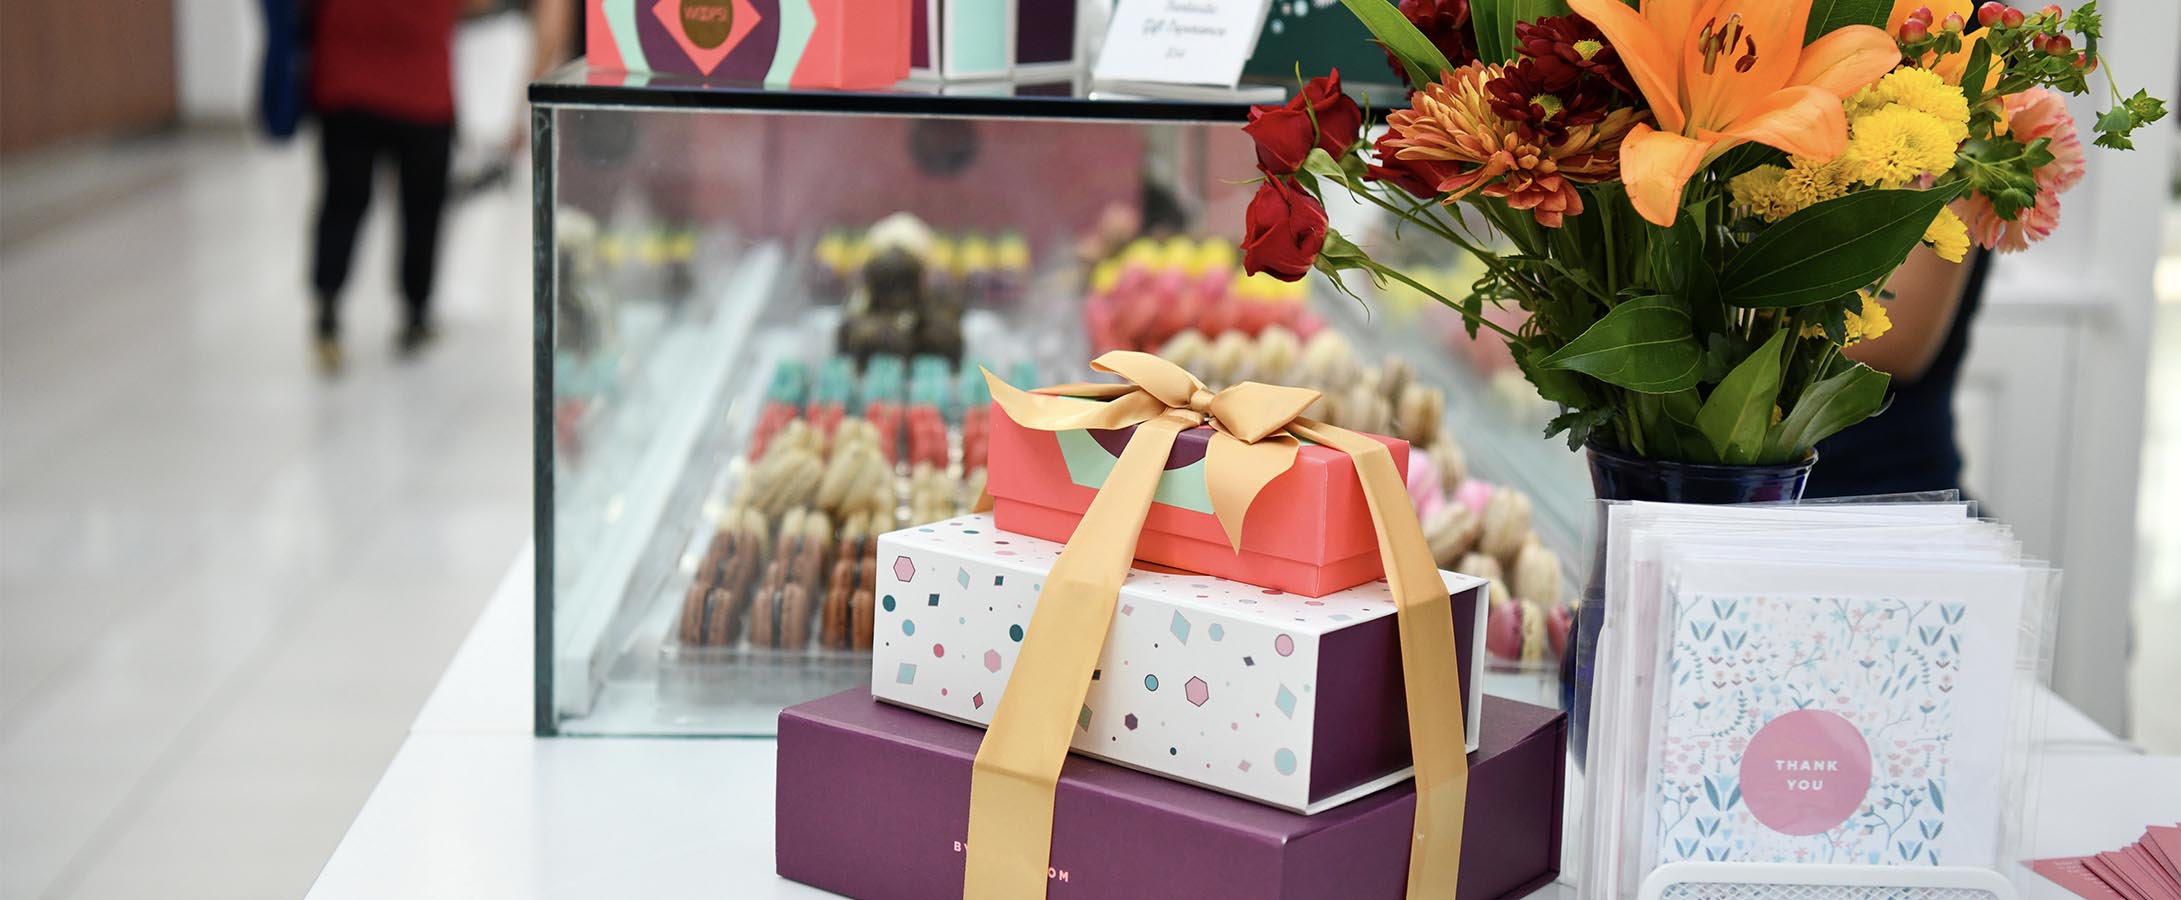 A French macaron stack with a golden ribbon is on top of a white counter. To the side are some greeting cards and flowers. Behind a counter are French macarons and macaron boxes.